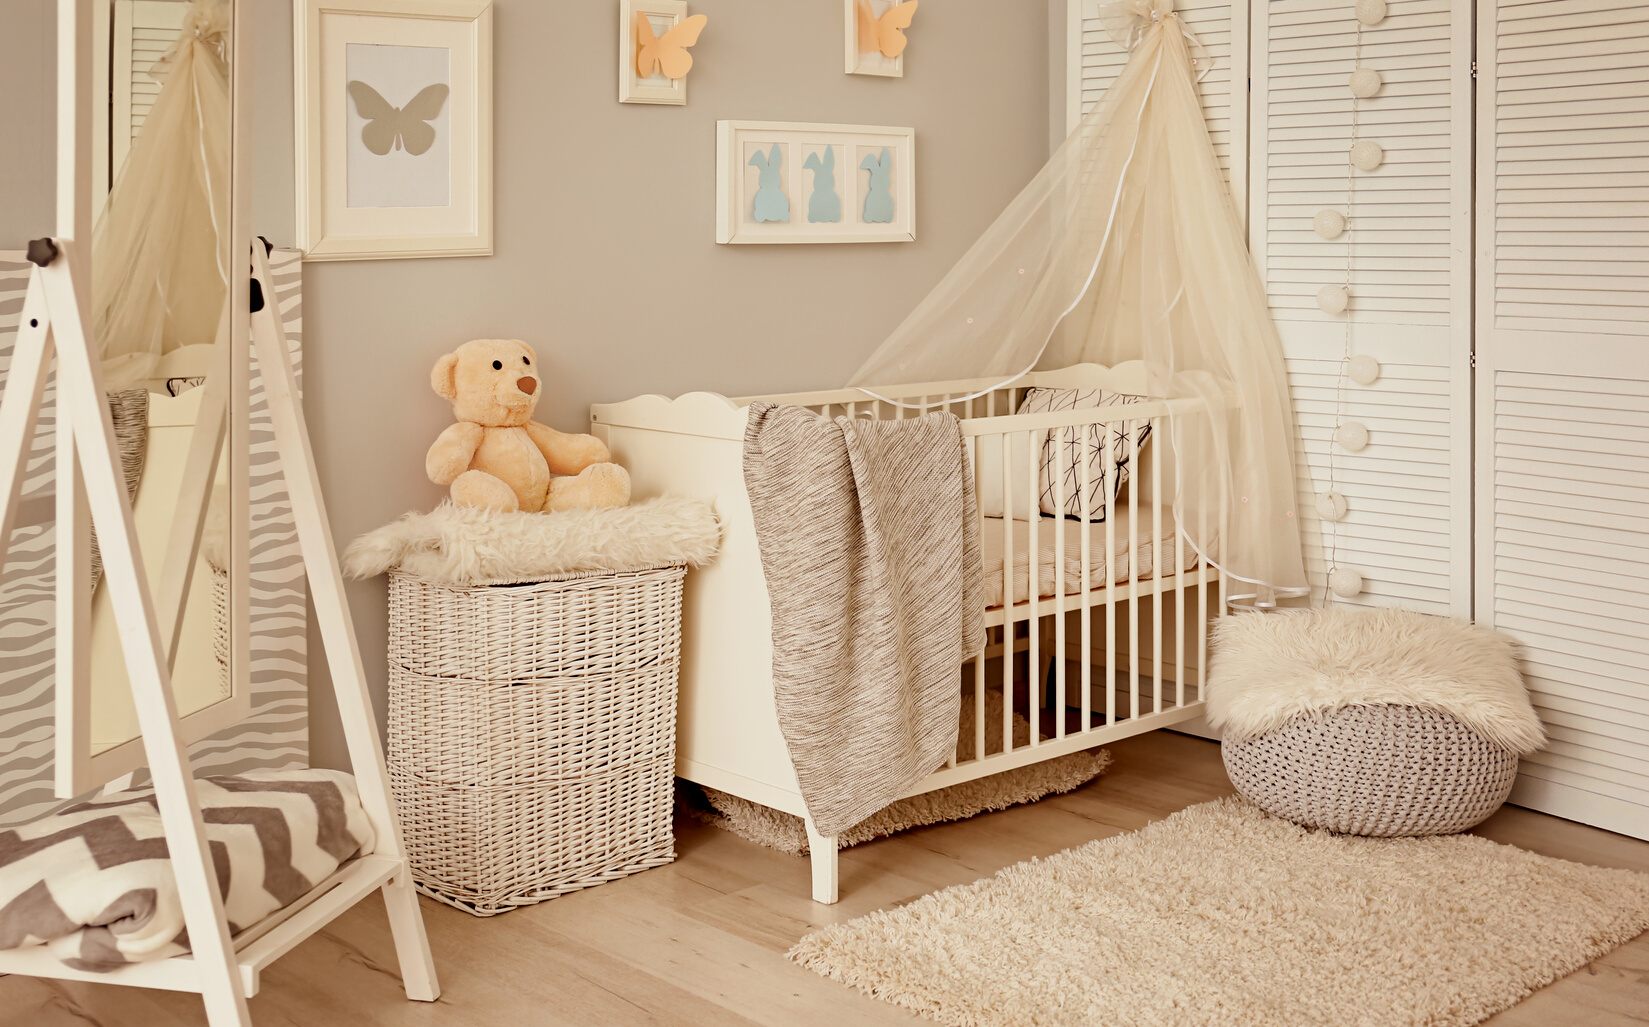 Baby Room Interior with a Crib